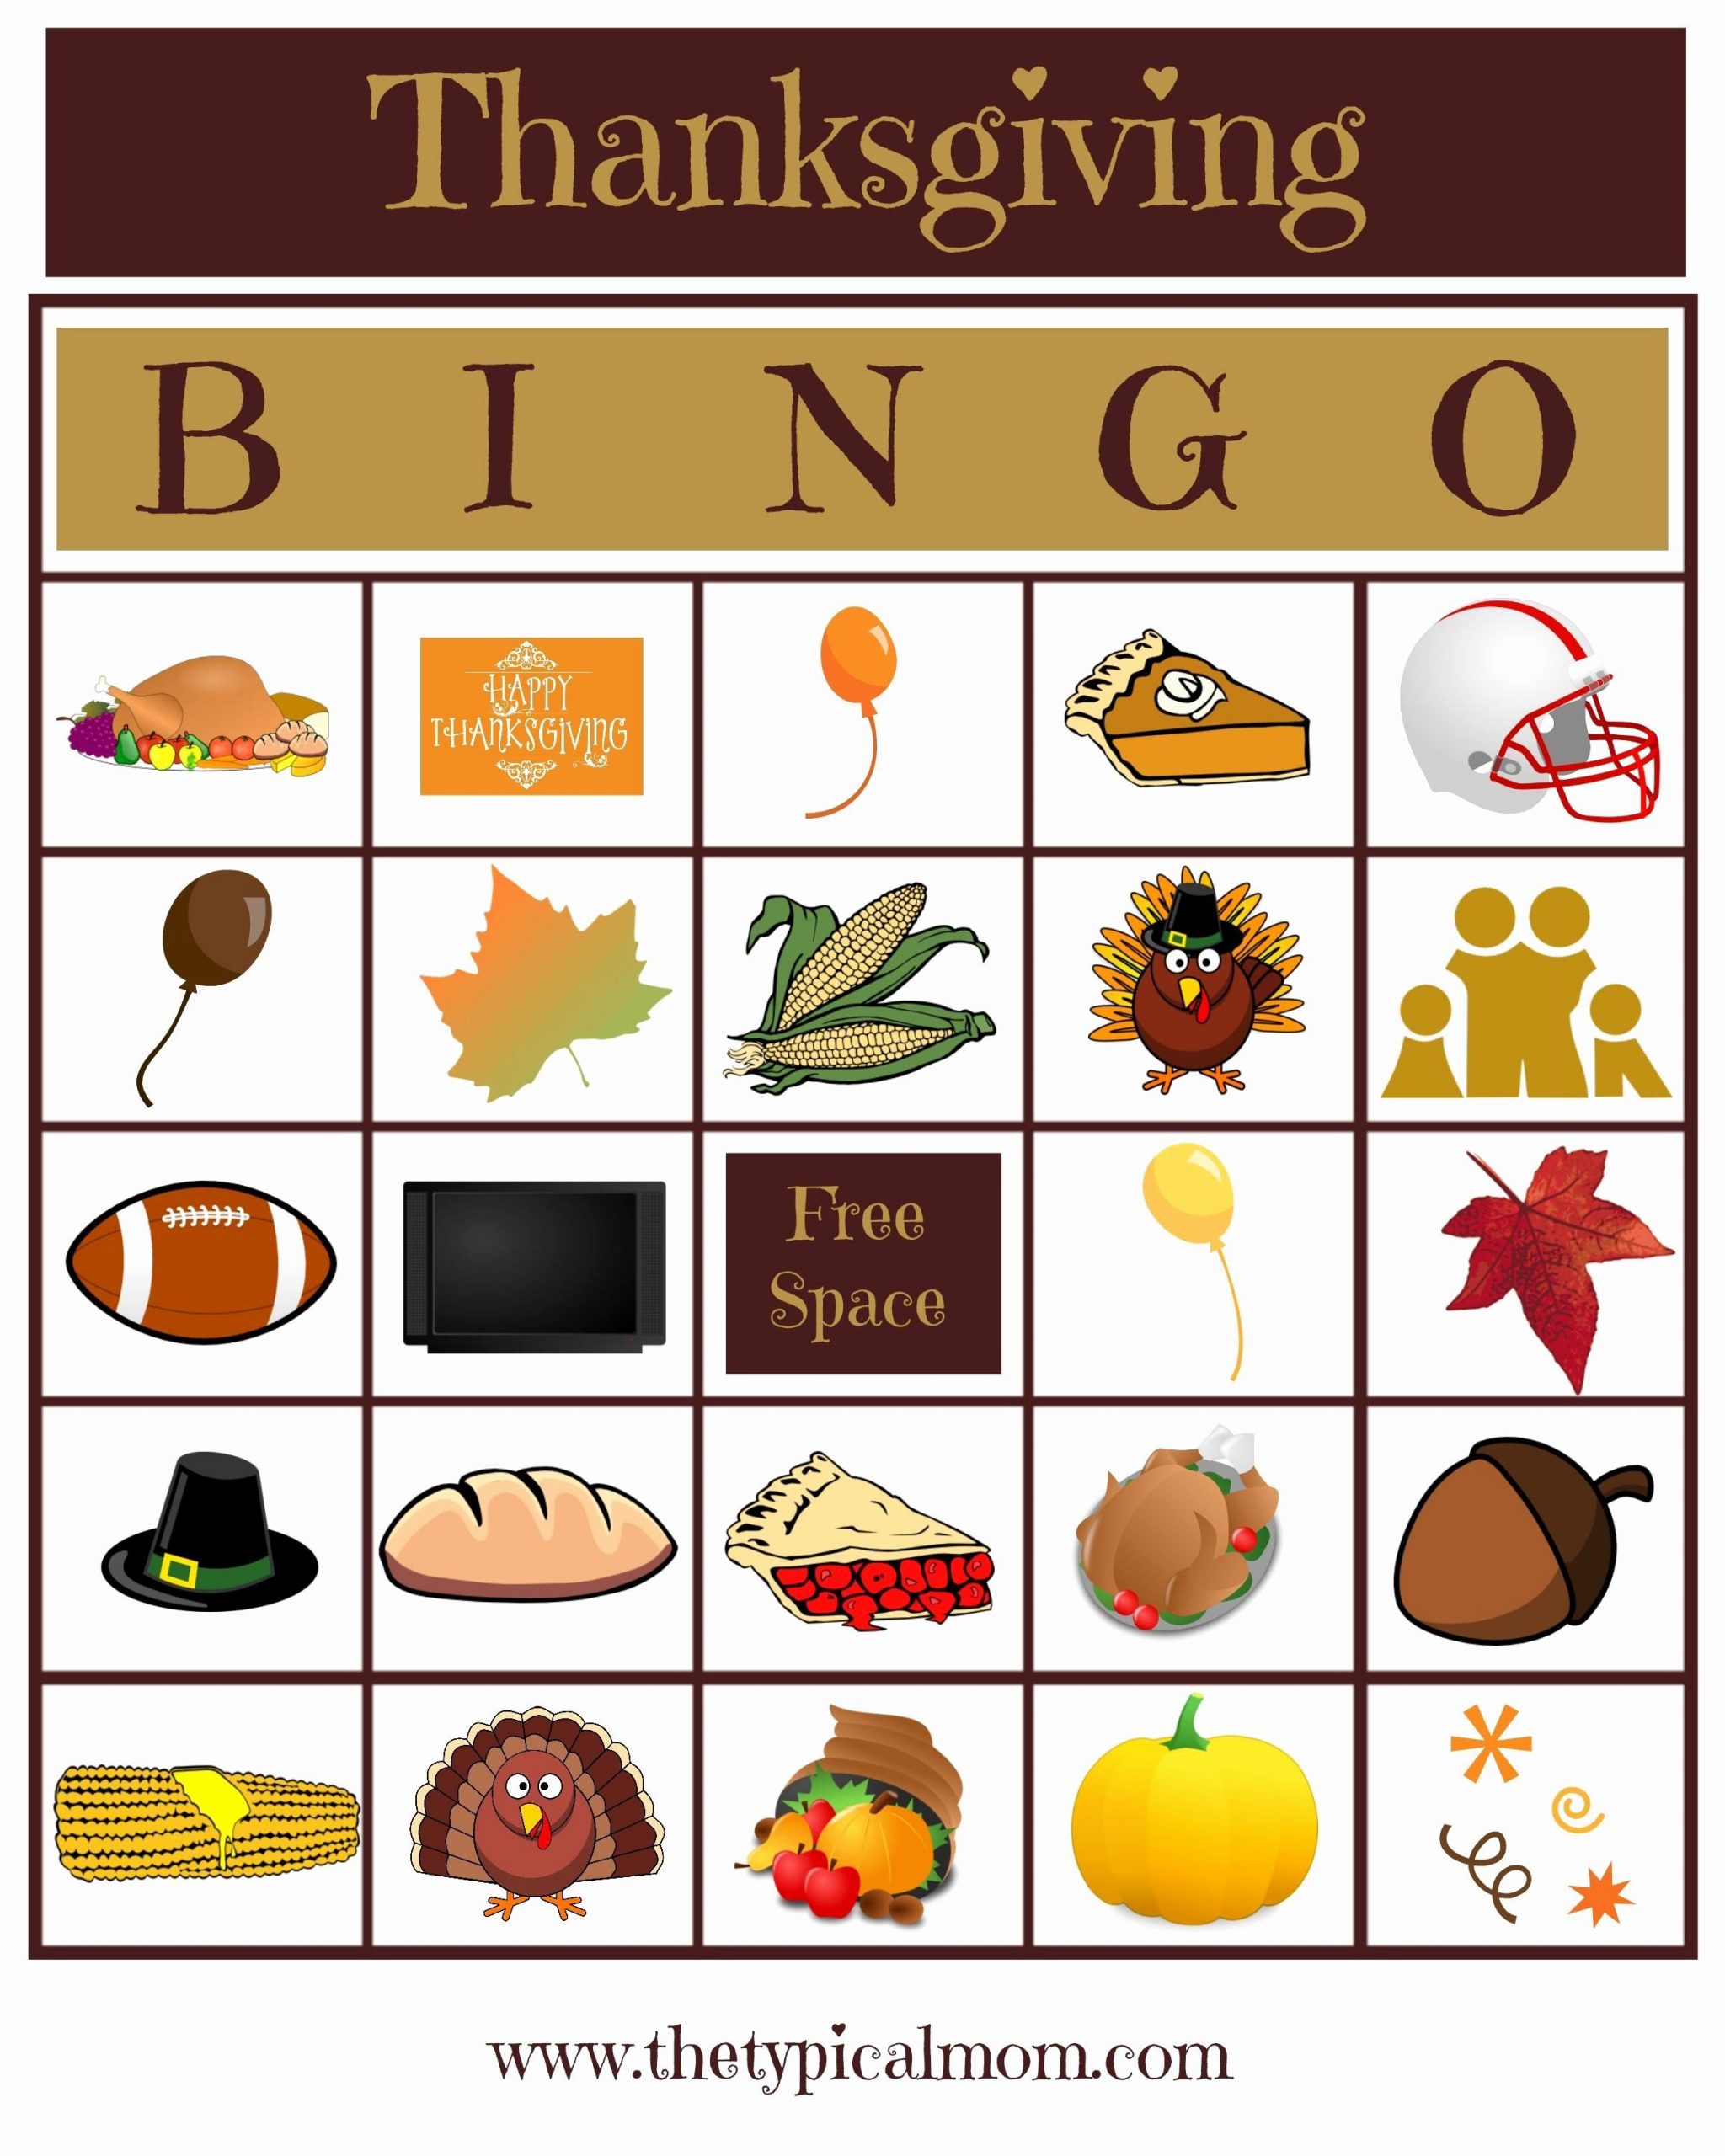 Print Out Thanksgiving Cards In 2020 Thanksgiving Bingo 